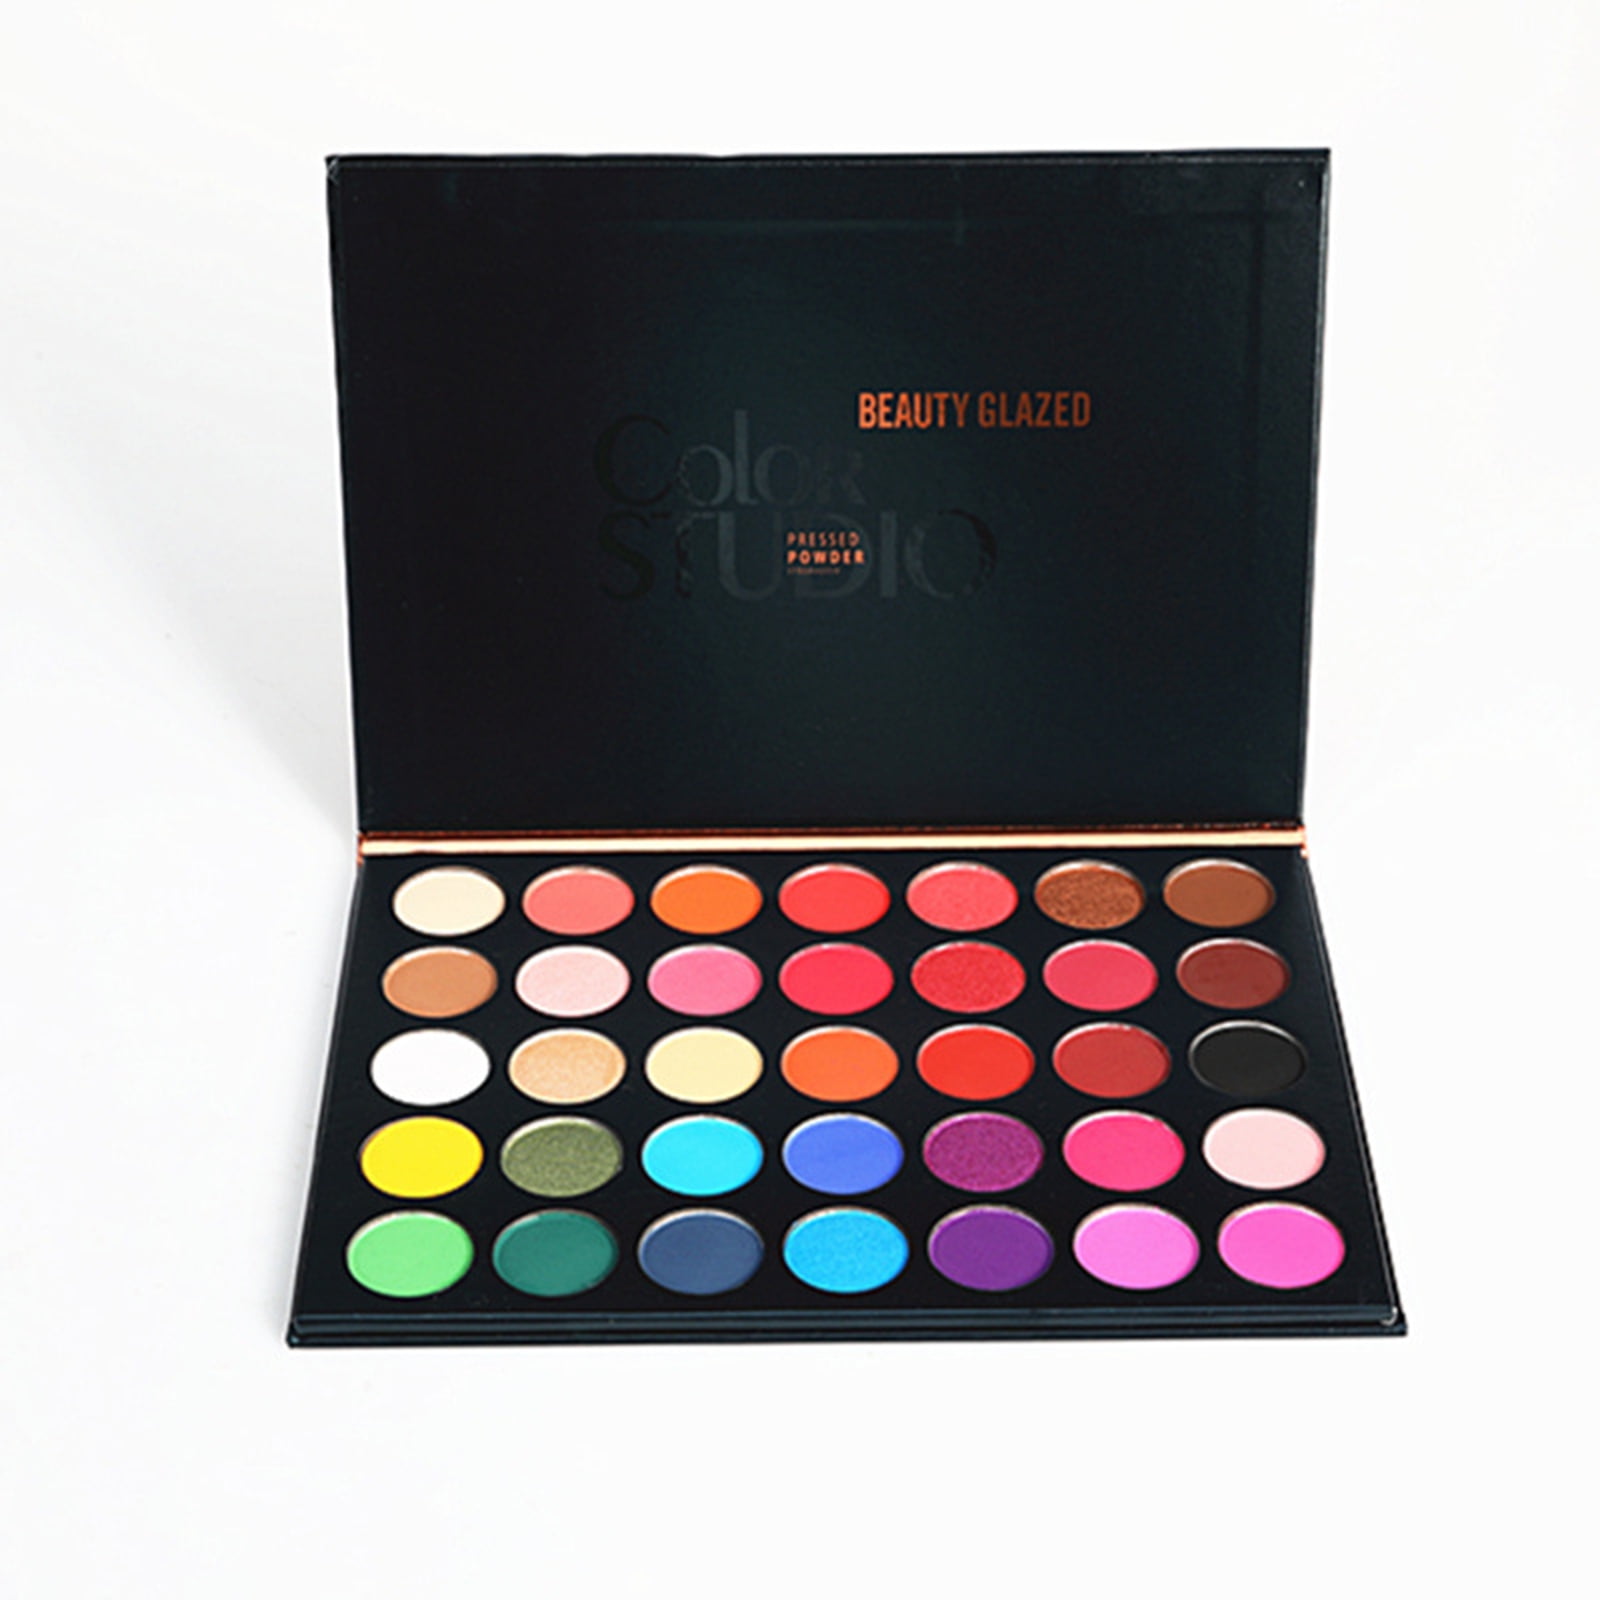 Beauty Glazed Eyeshadow Palette Gorgeous Me Eye Makeup Palette Tray With  Press Powder, Shimmer, And Matte Colors Top Quality Cosmetics 9772849 From  Honglongele04, $14.5